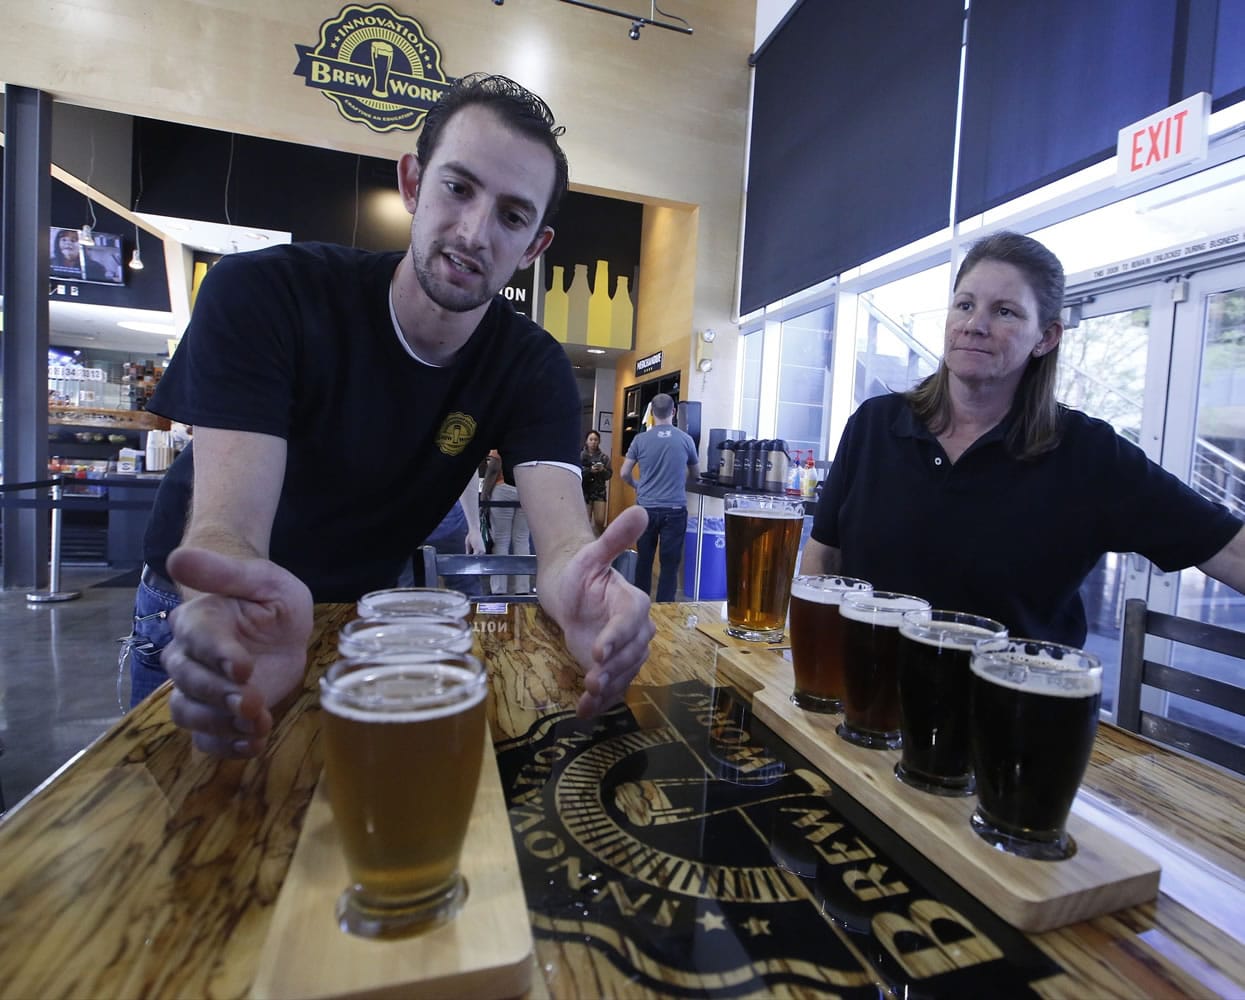 Koby Harris, brewery production manager, left, and Sandra Cain, assistant director of retail operations, present their freshly brewed beers March 19 at Innovation Brew Works in the California State Polytechnic University, Pomona in Pomona, Calif.